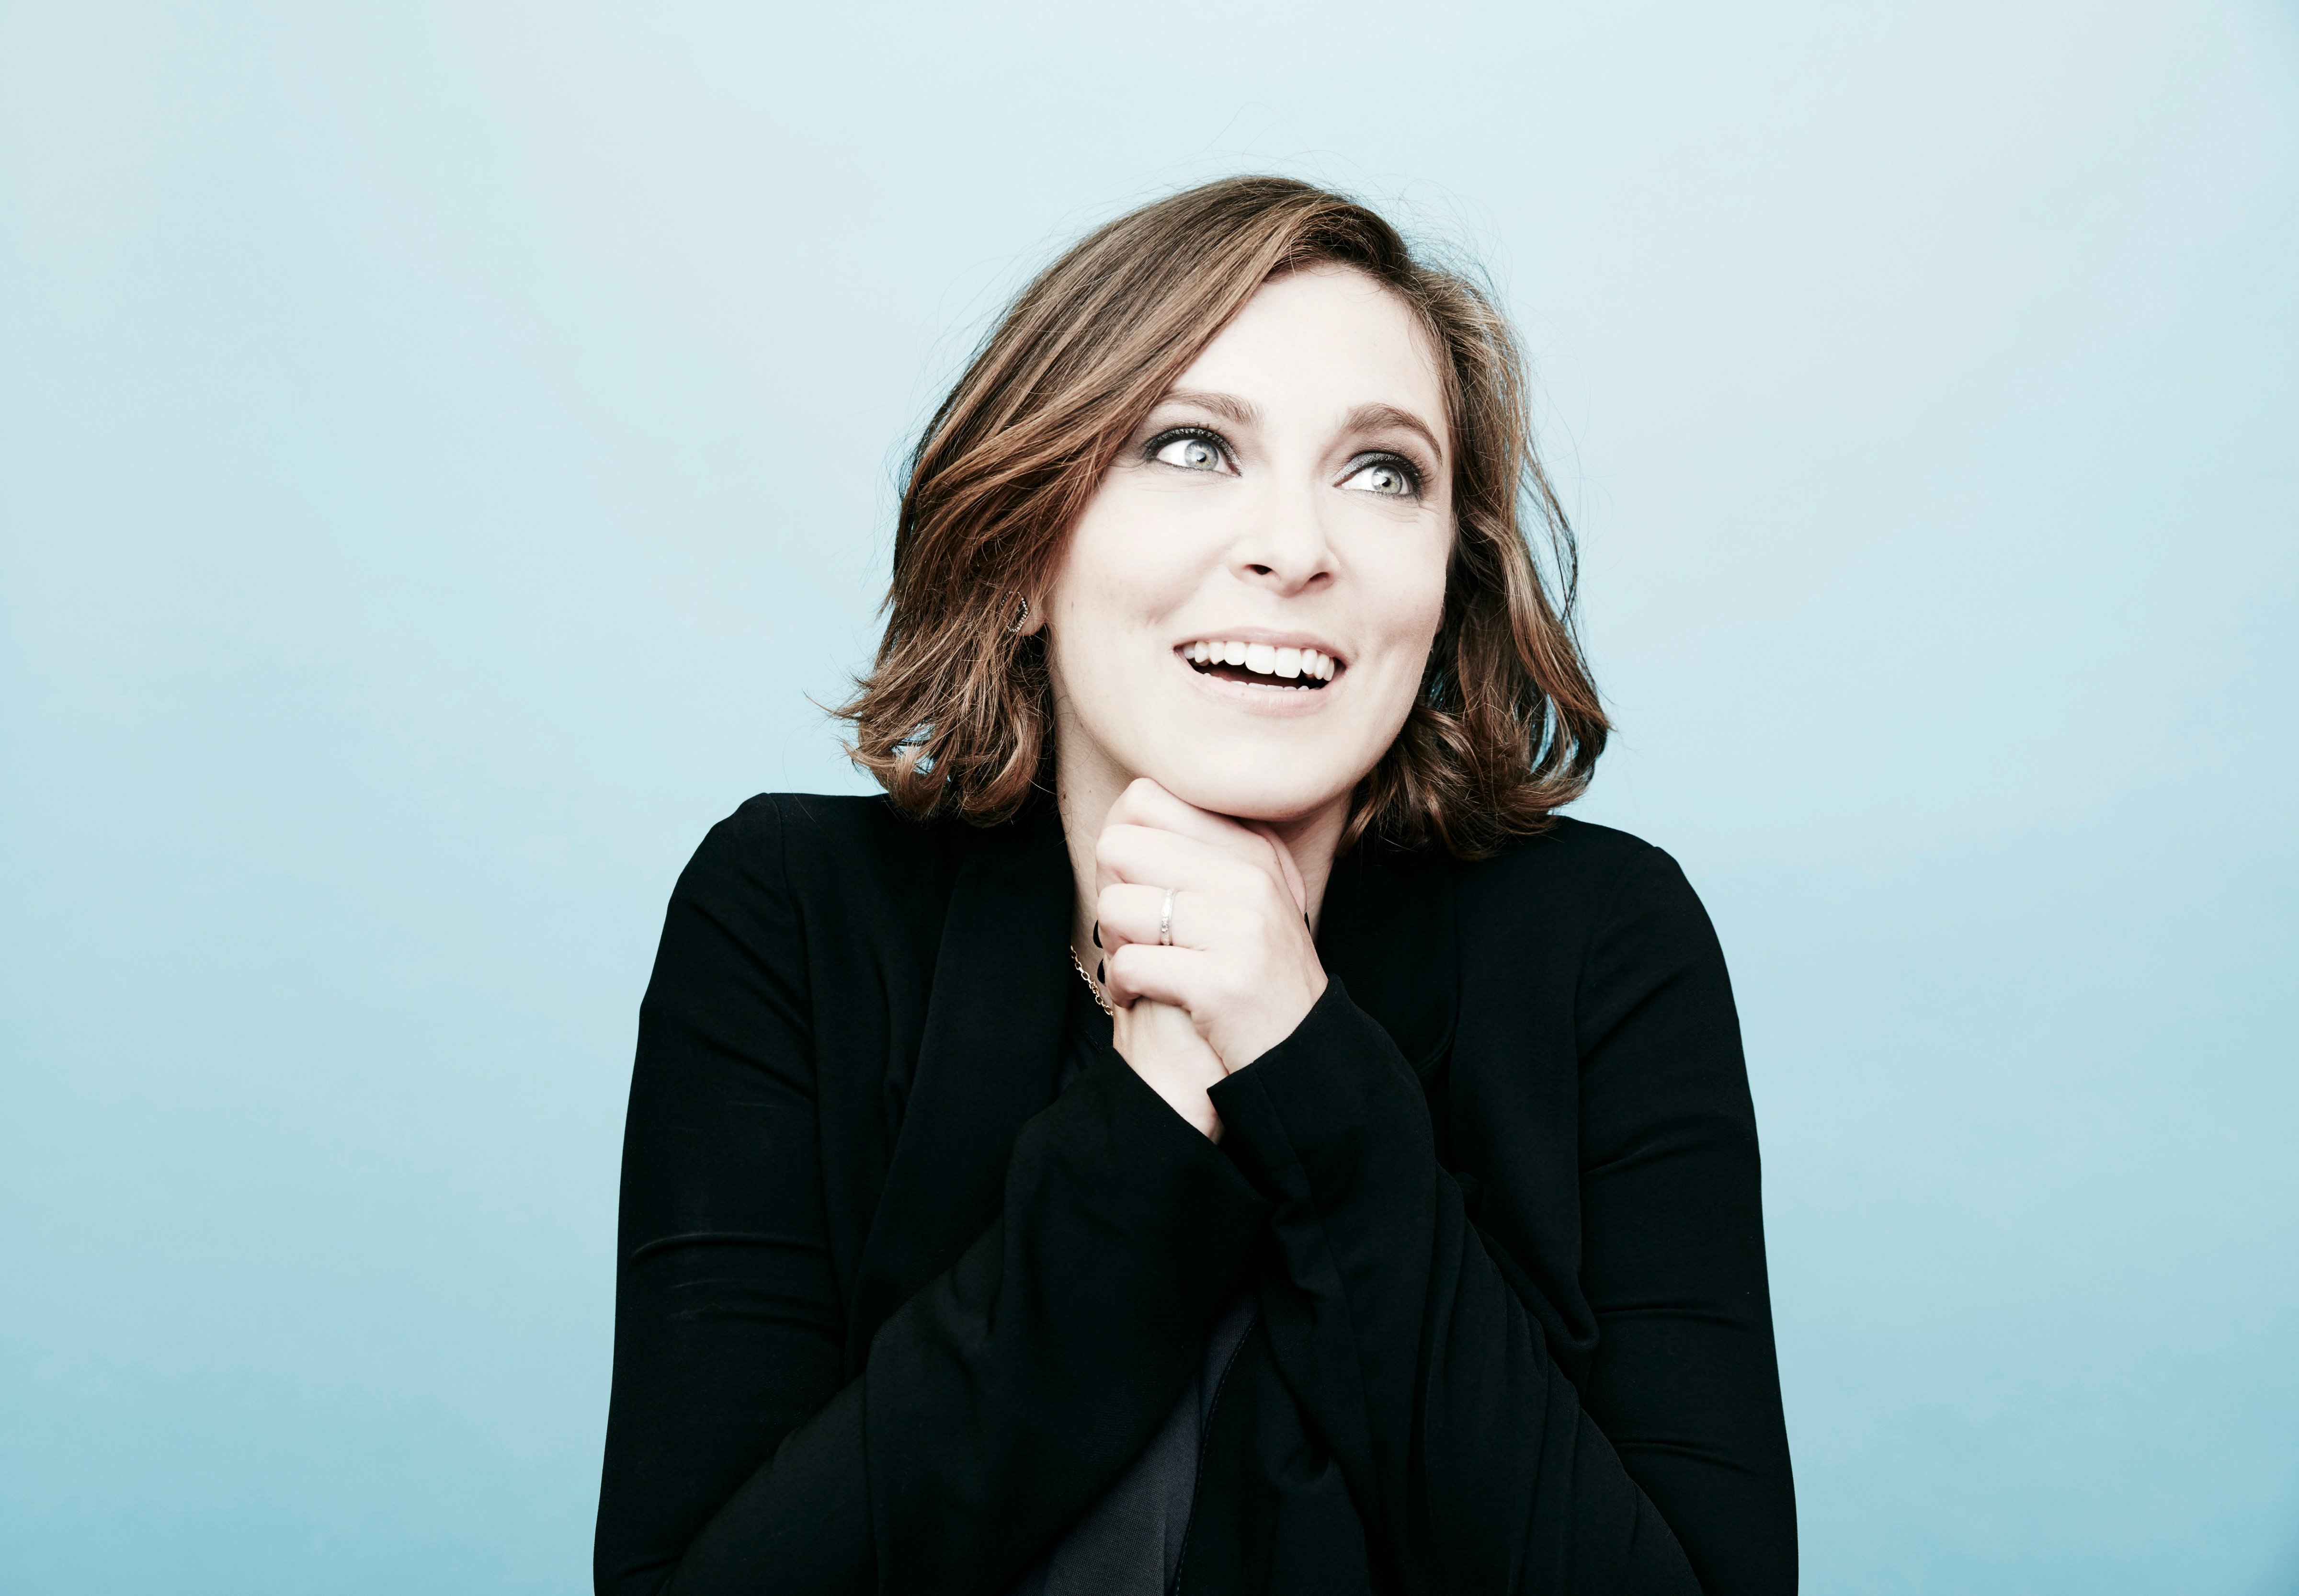 Rachel Bloom poses in the Getty Images Portrait Studio on August 11, 2015 in Beverly Hills, California.